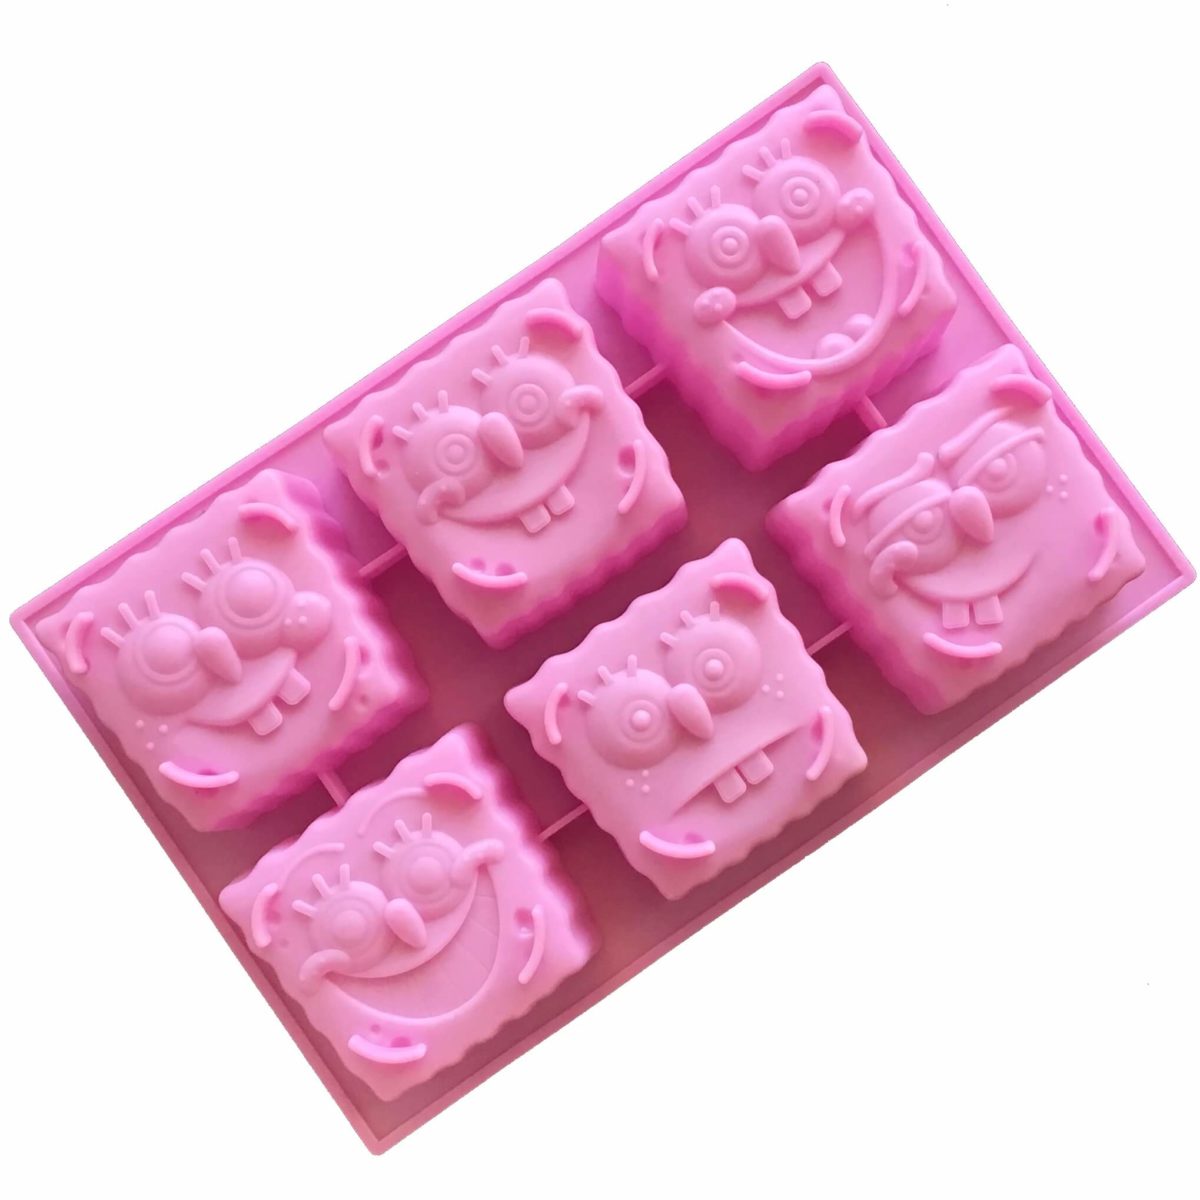 pink six cavity silicone mould with Sponge Bob head-shaped cavities each with an individual facial expression